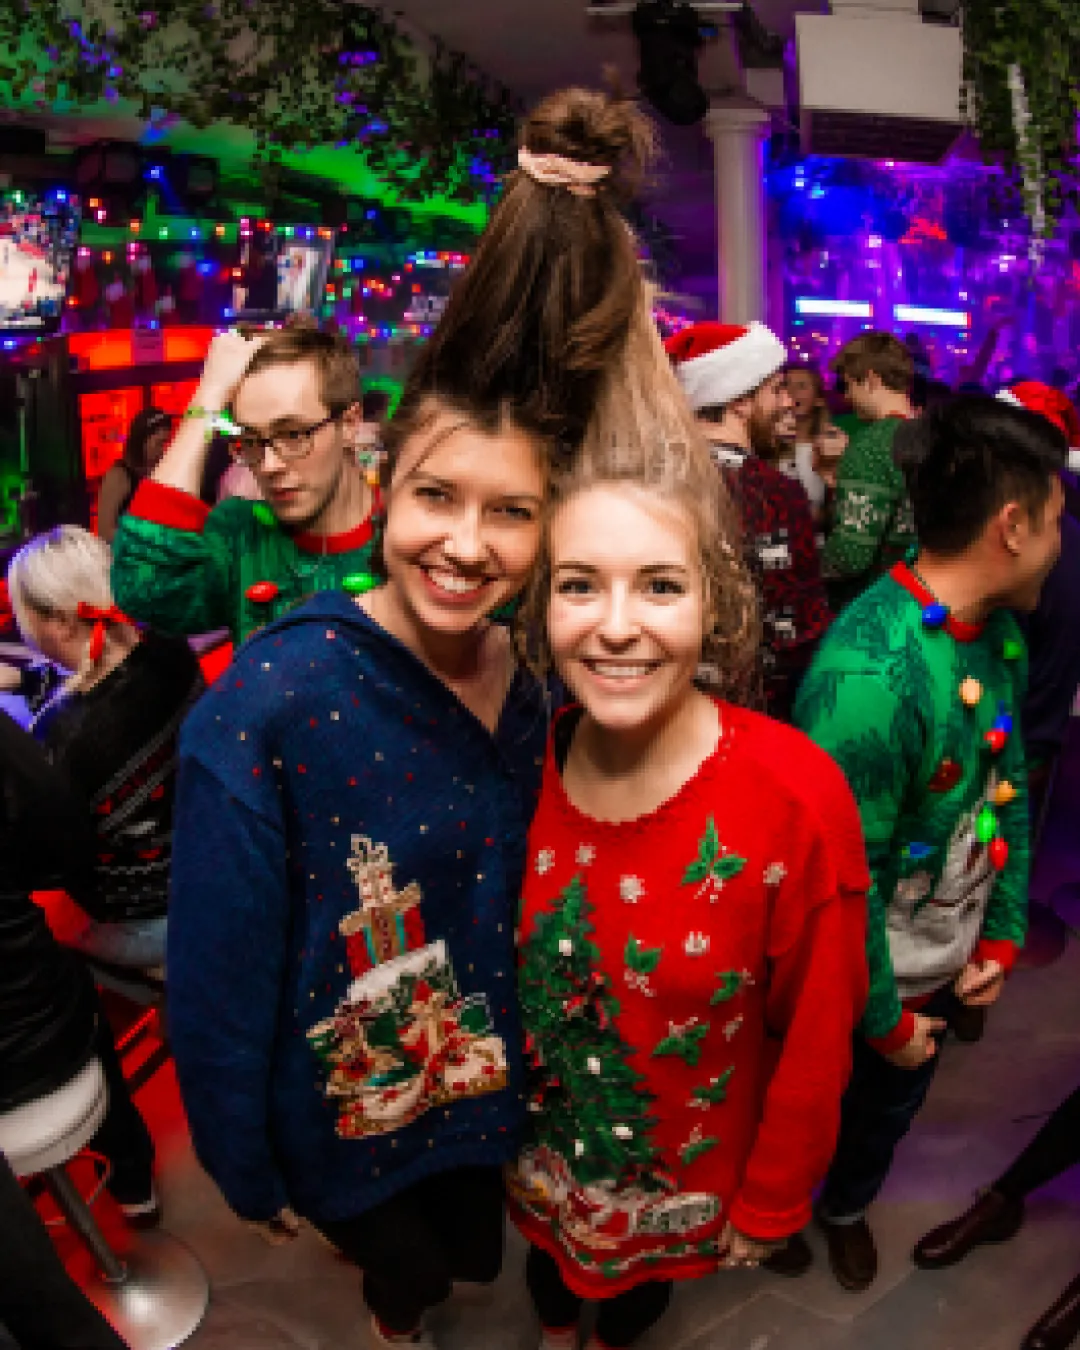 Joyful and festive friends in funky Christmas sweaters laughing at bar crawl event
